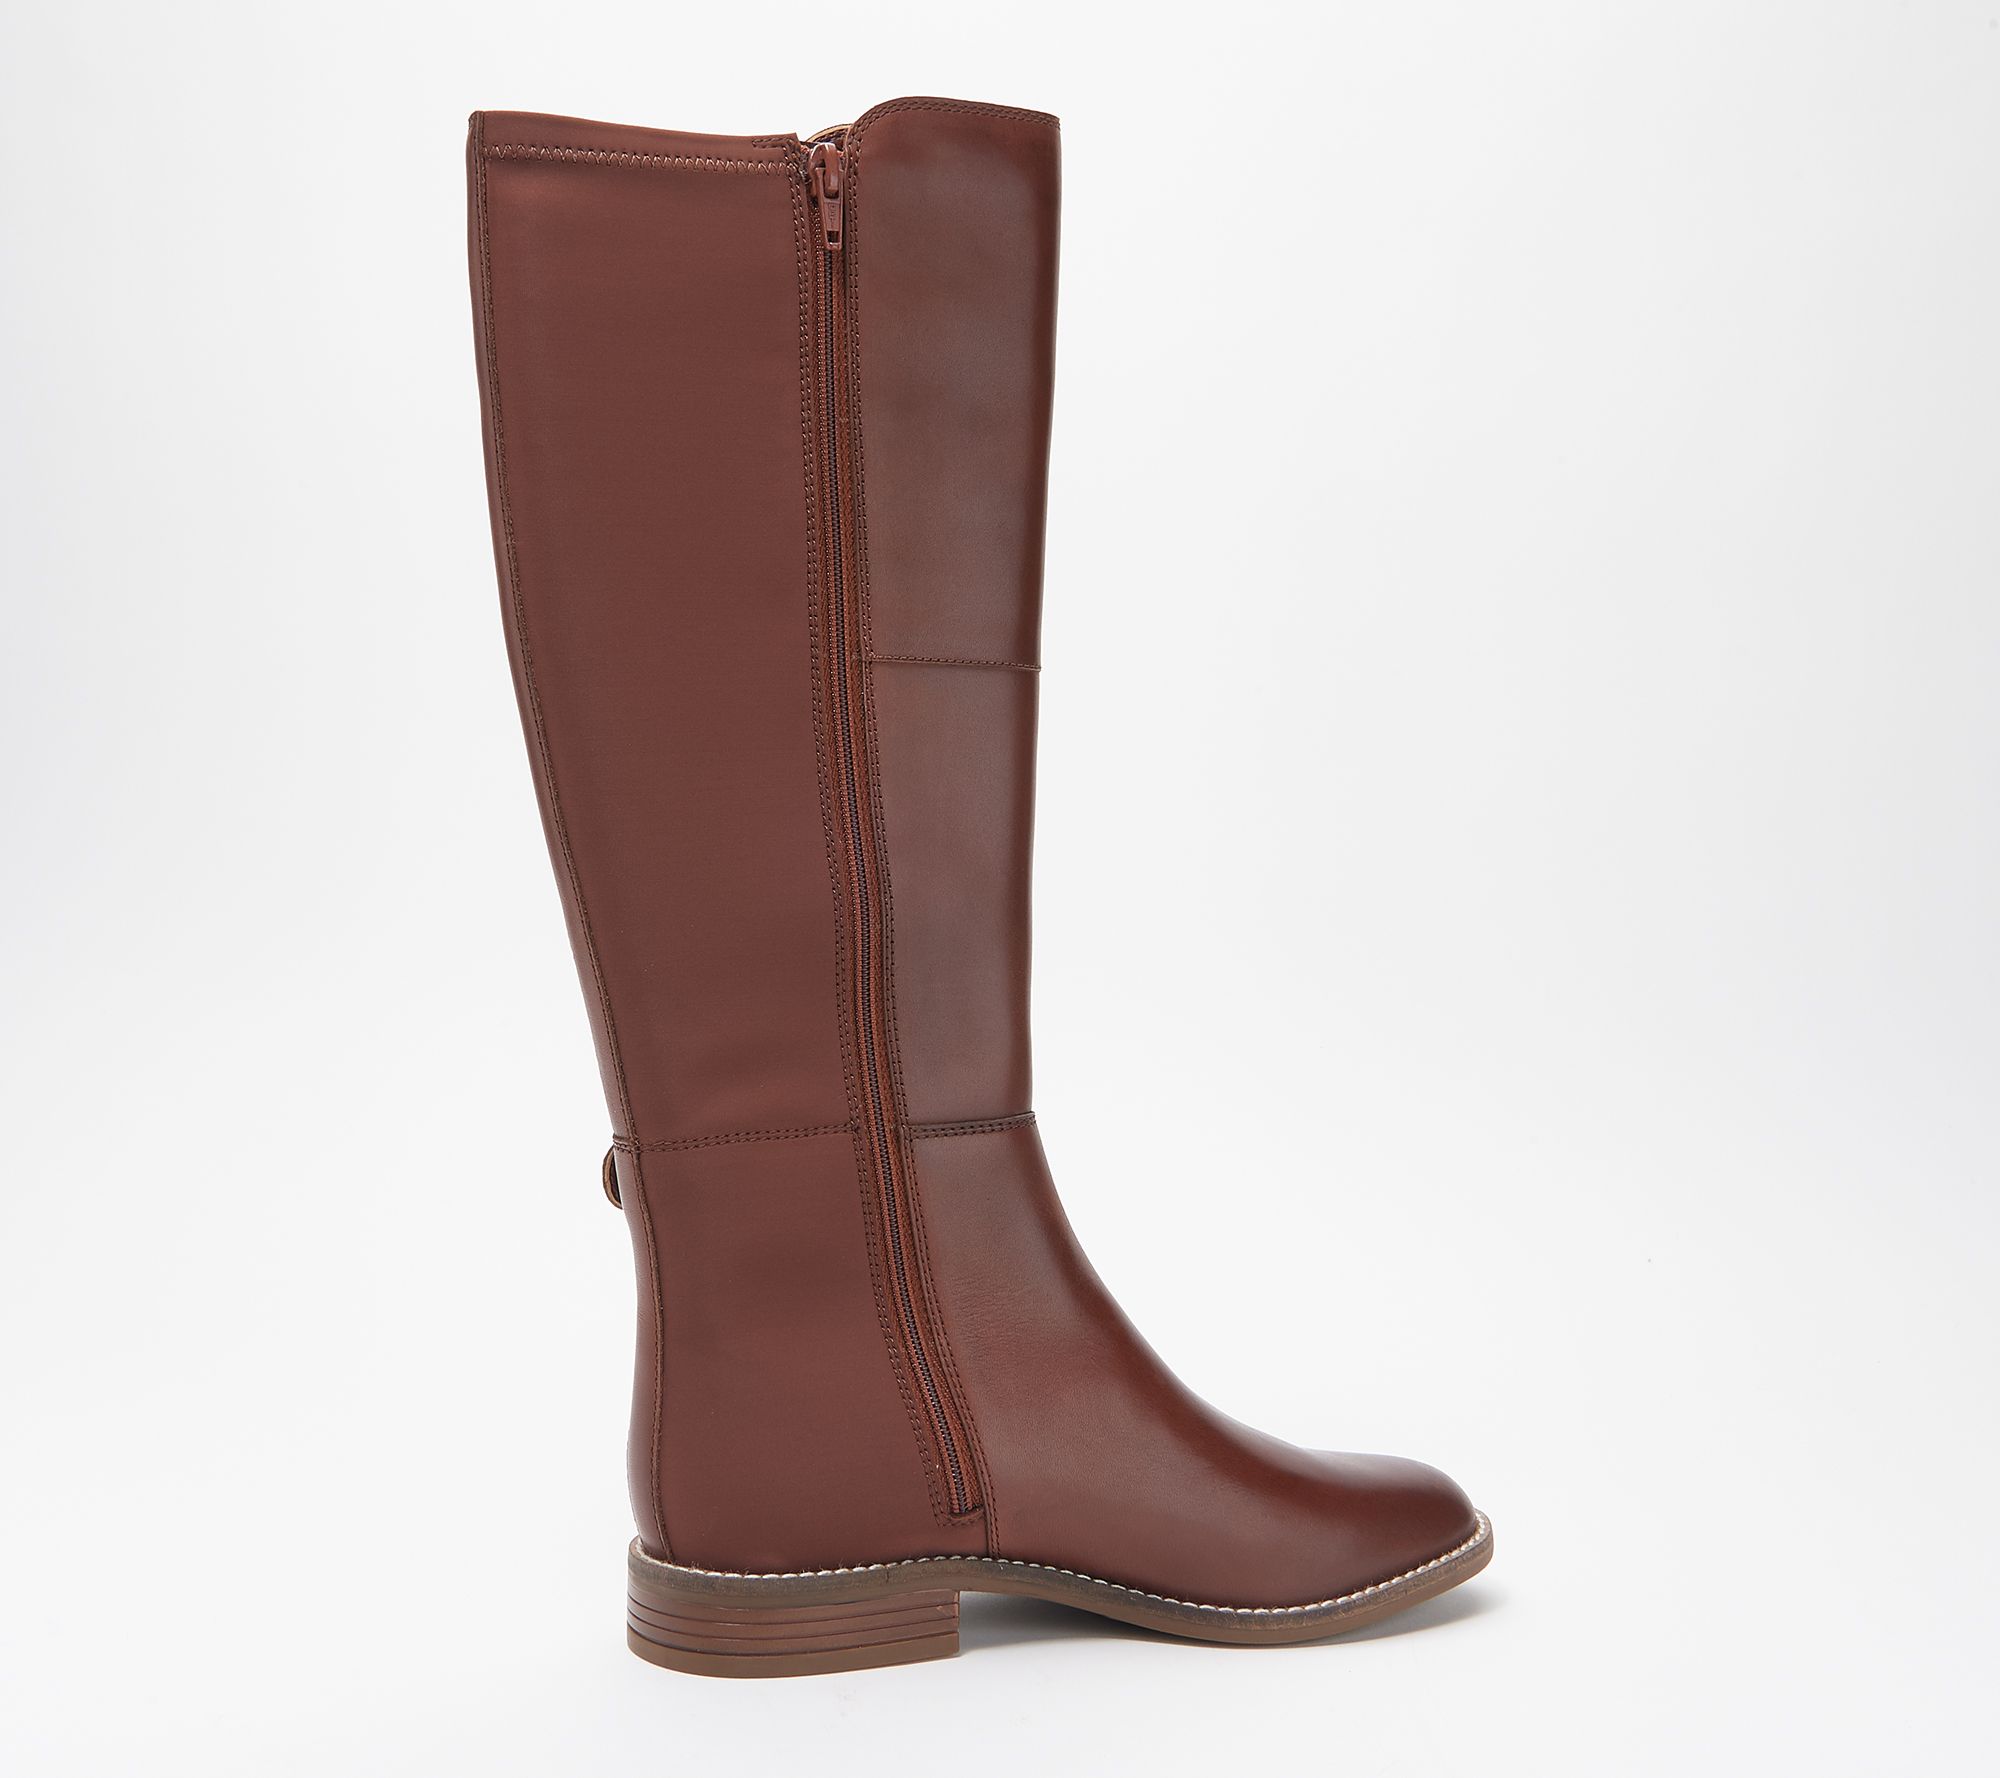 qvc clarks riding boots